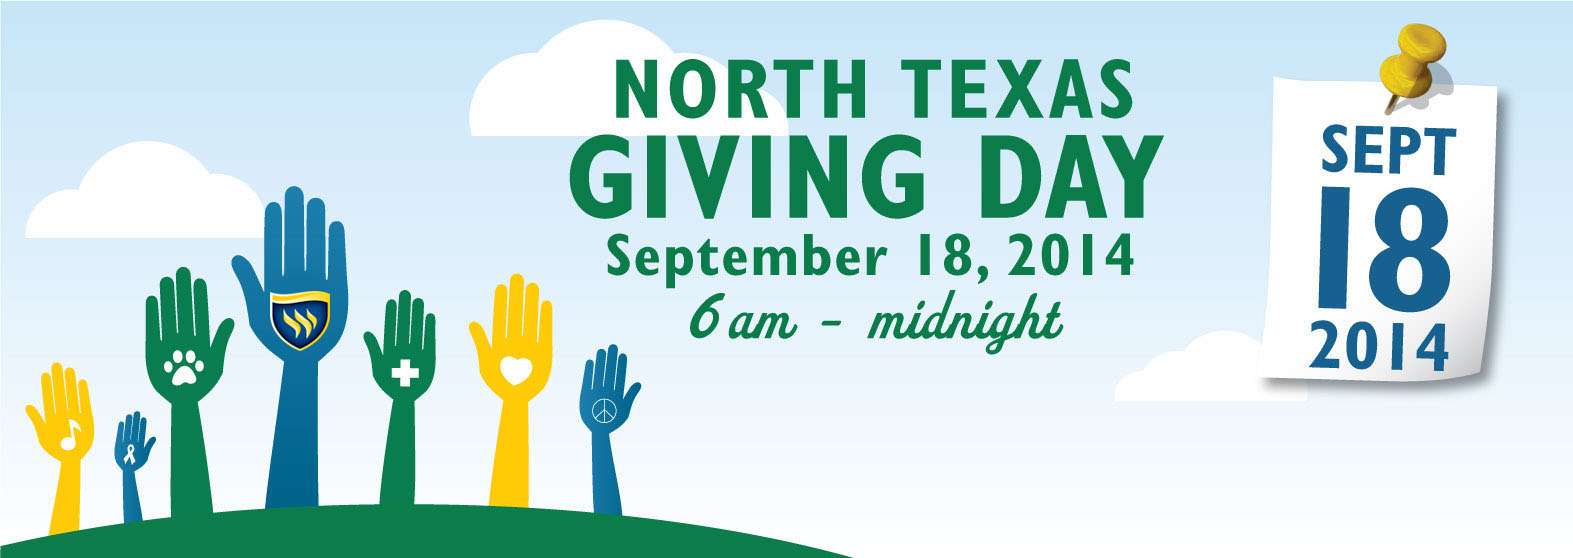 North Texas Giving Day image